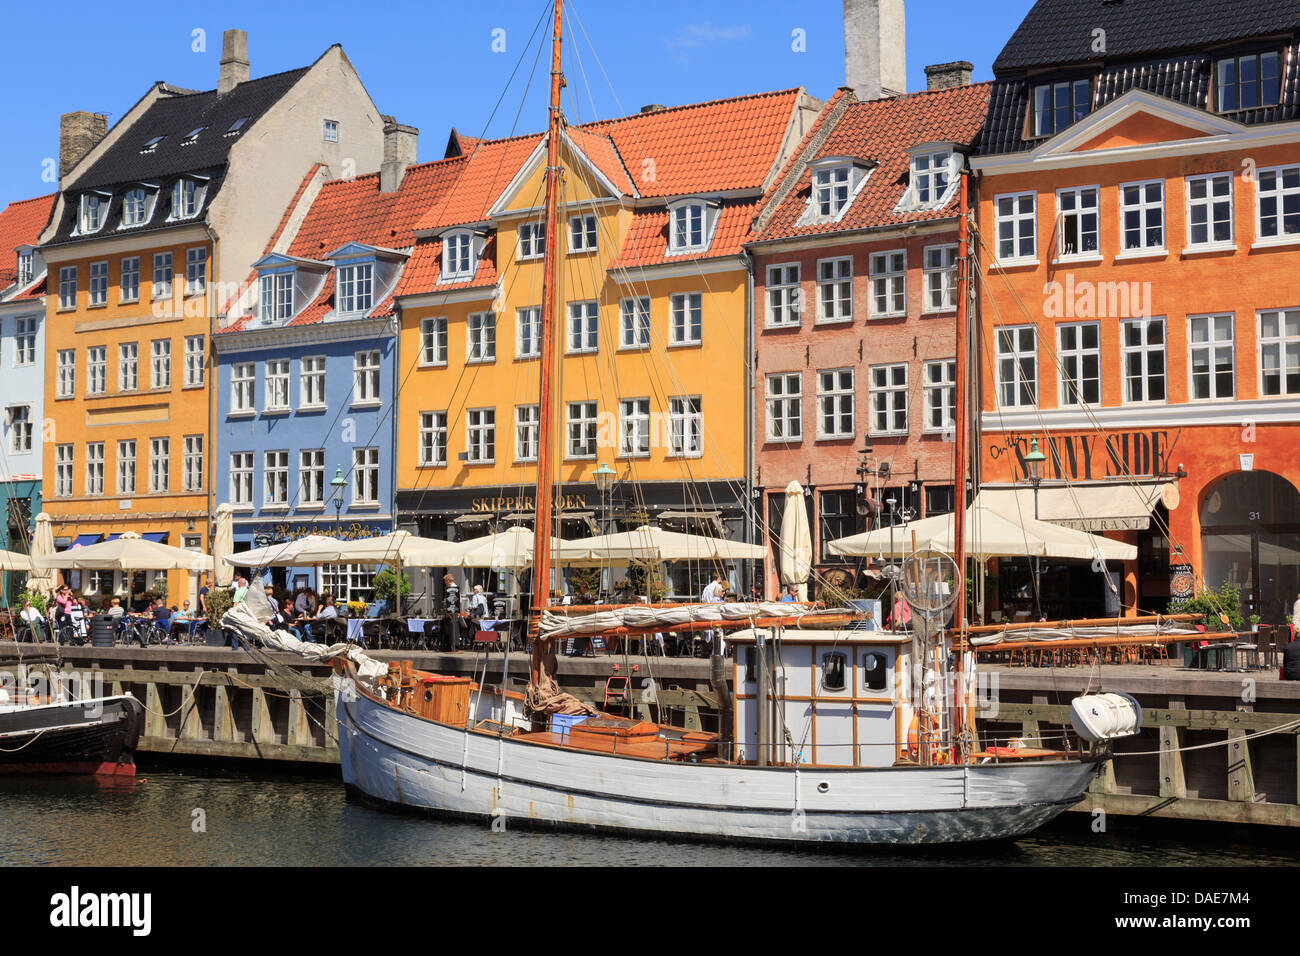 Old wooden boat on canal with cafes and colourful buildings on 17th century waterfront in Nyhavn harbour Copenhagen Denmark Stock Photo